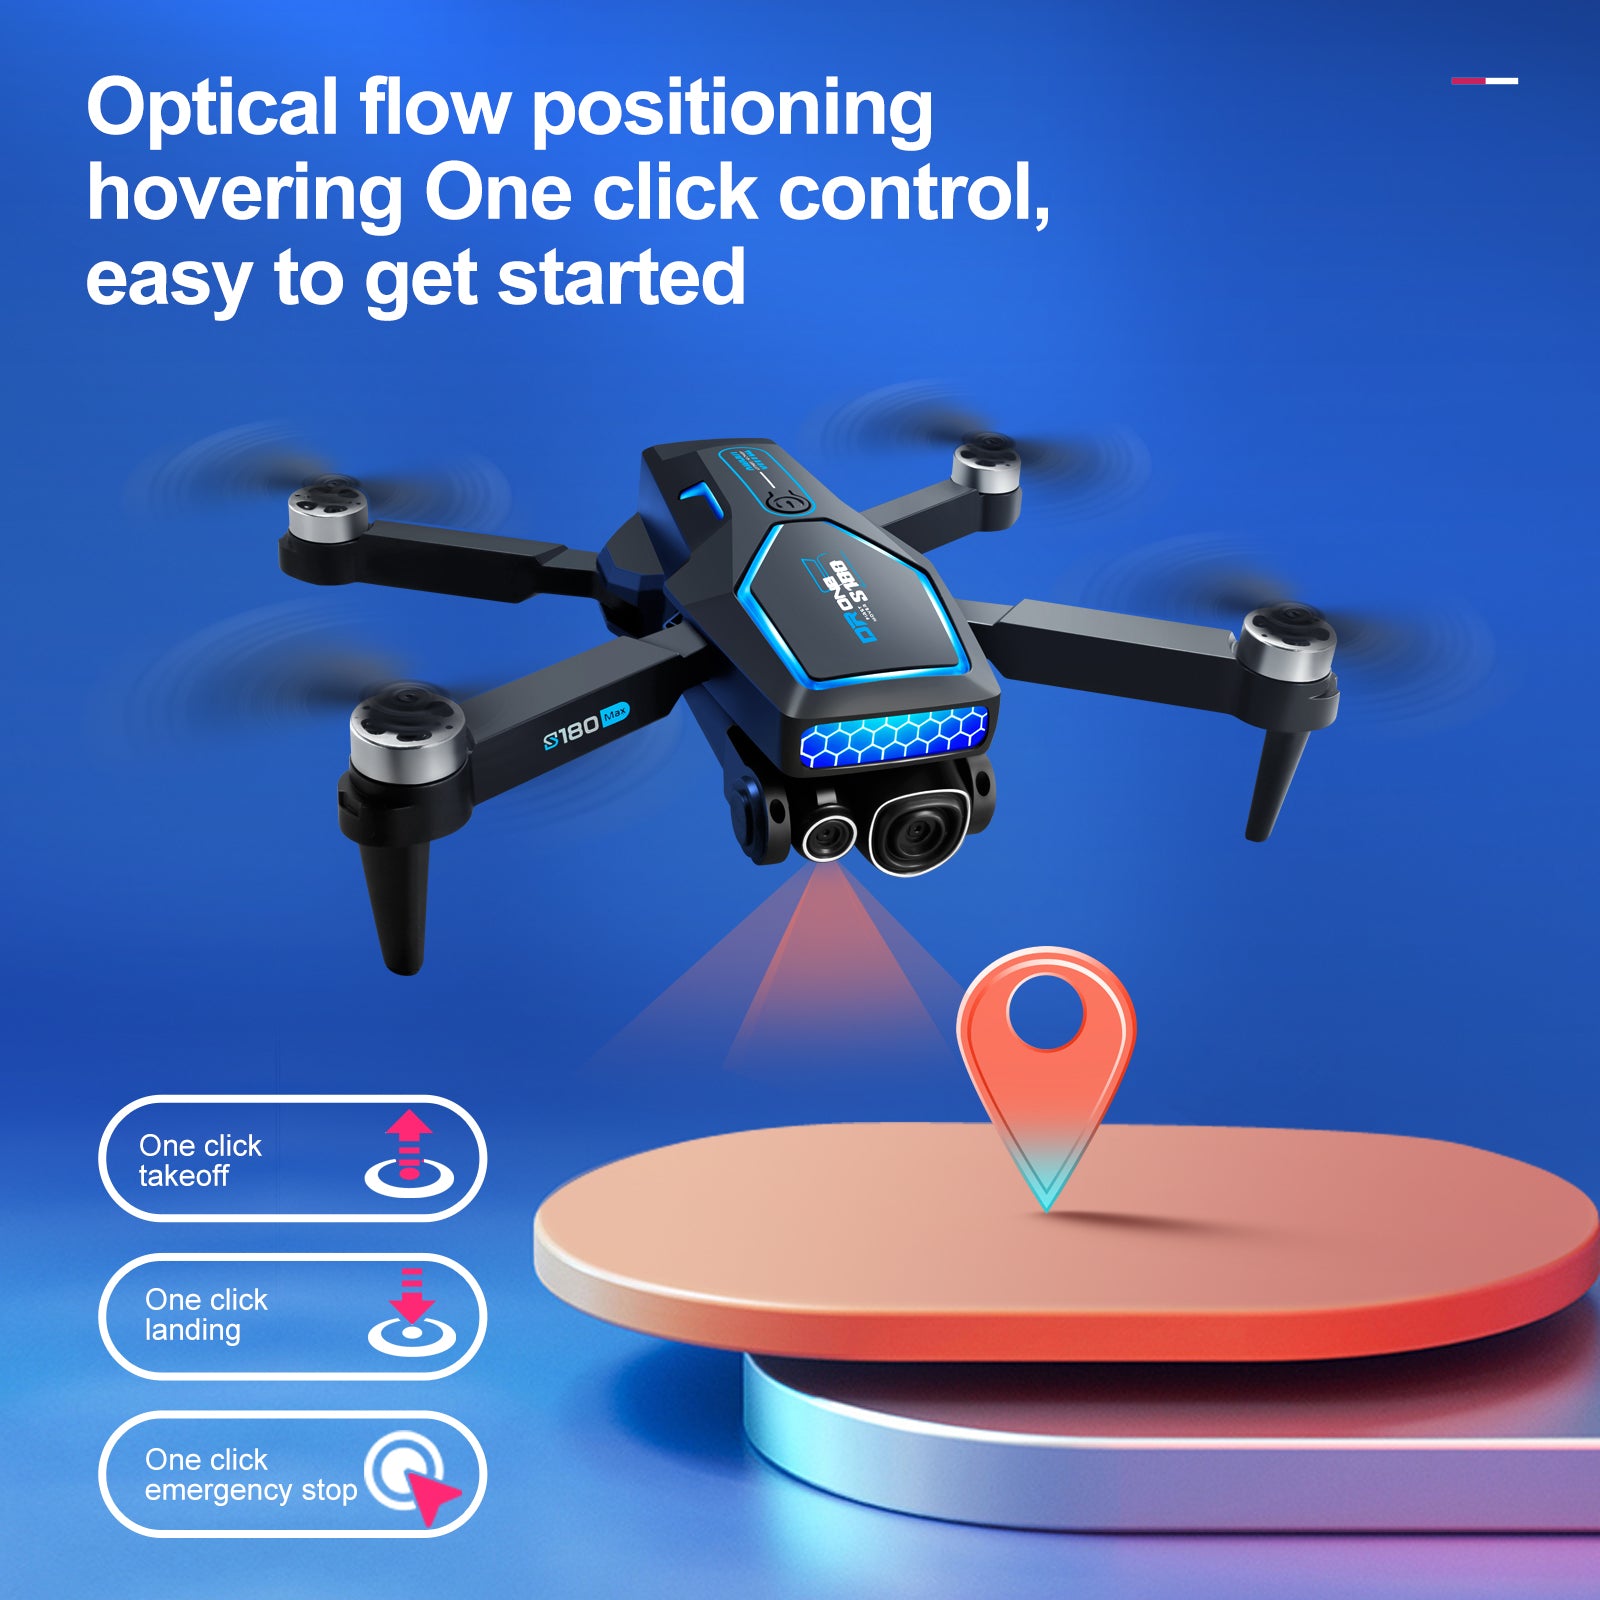 S180 Drone, Easy drone operation with optical flow positioning and hover control, plus one-click takeoff, landing, and stopping.